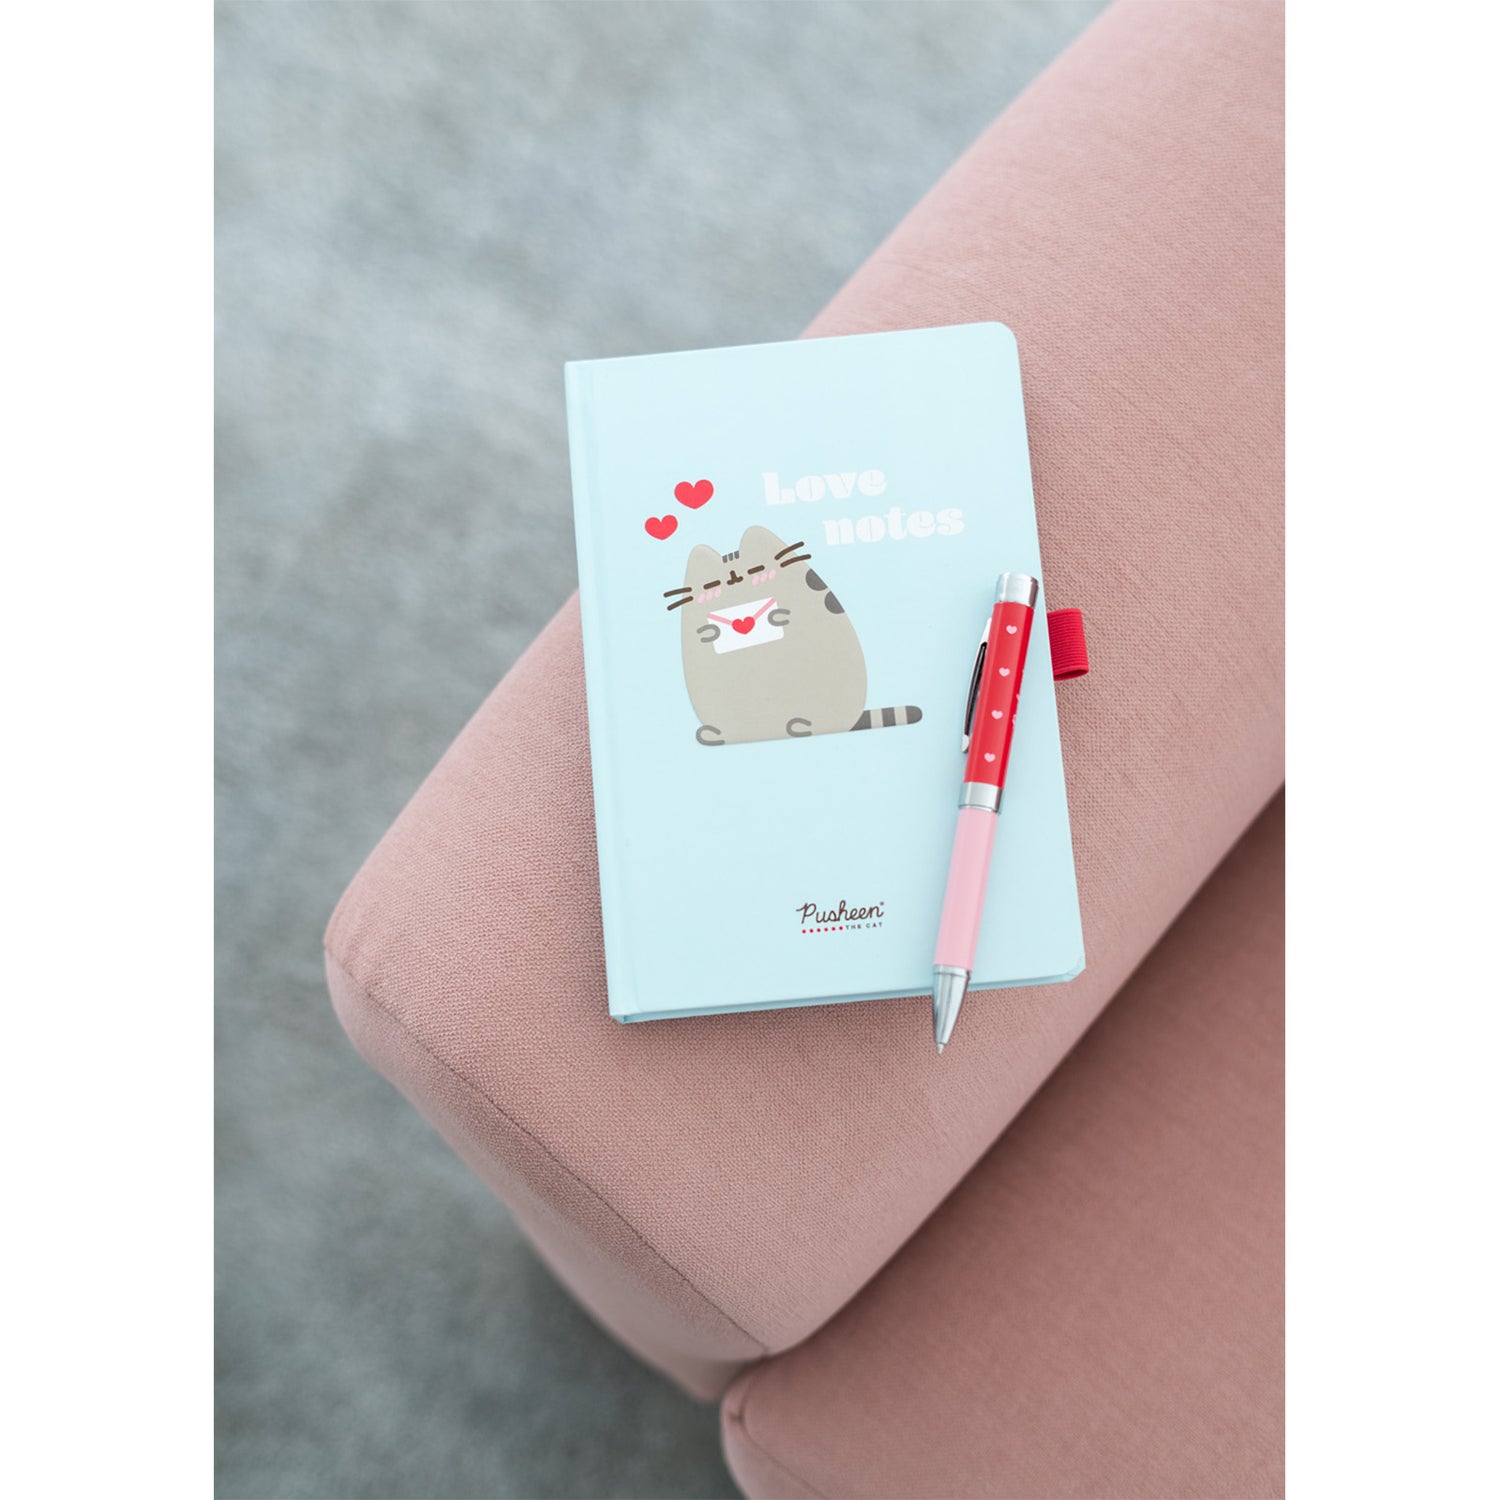 Pusheen Purrfect Love Collection A5 Premium Notebook With Projector Pen